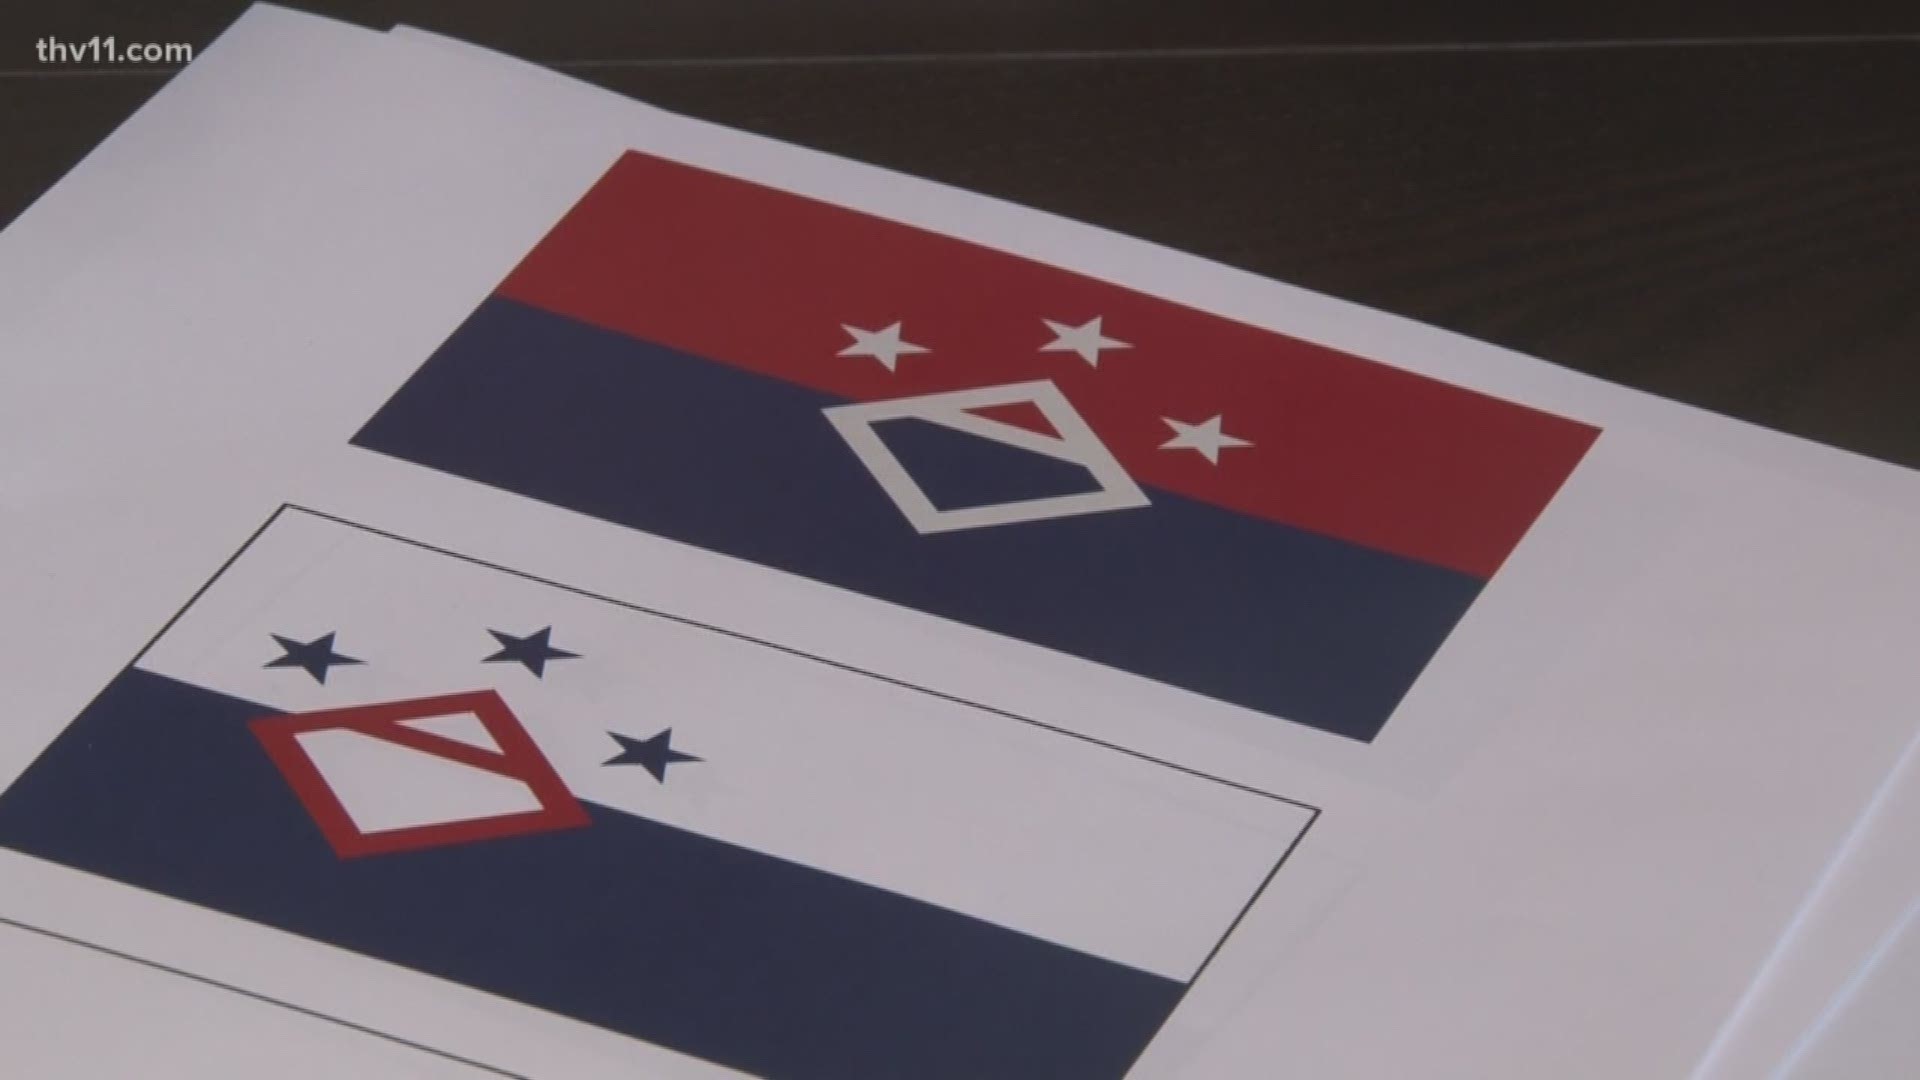 An Arkansan and a legislator are putting forth efforts to strip Confederate designation from the state flag.